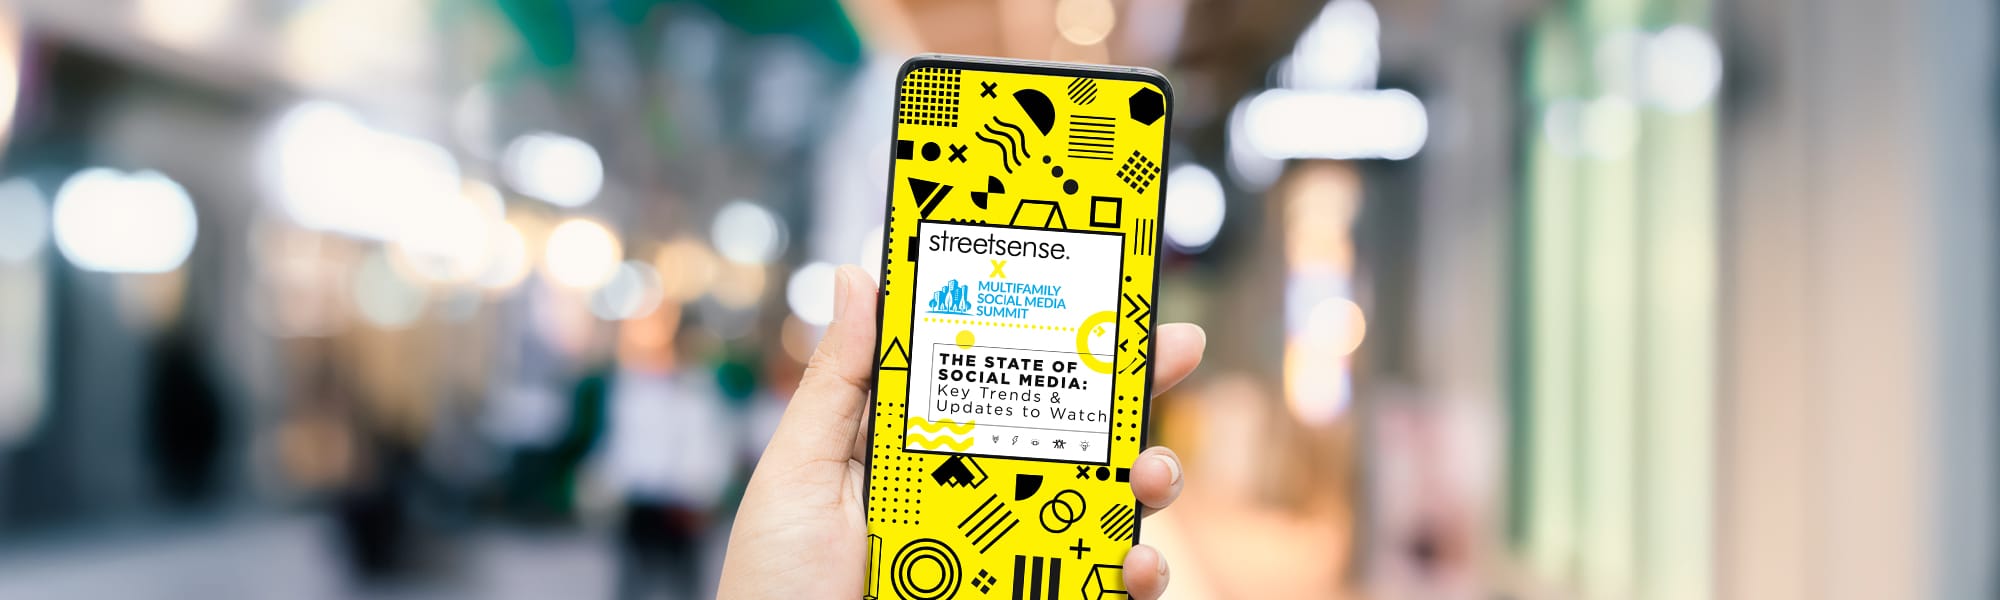 photo of a smartphone with a graphic on it that states "Streetsense. Multifamily Social Media Summit. The State of Social Media: Key Trends & Updates to Watch